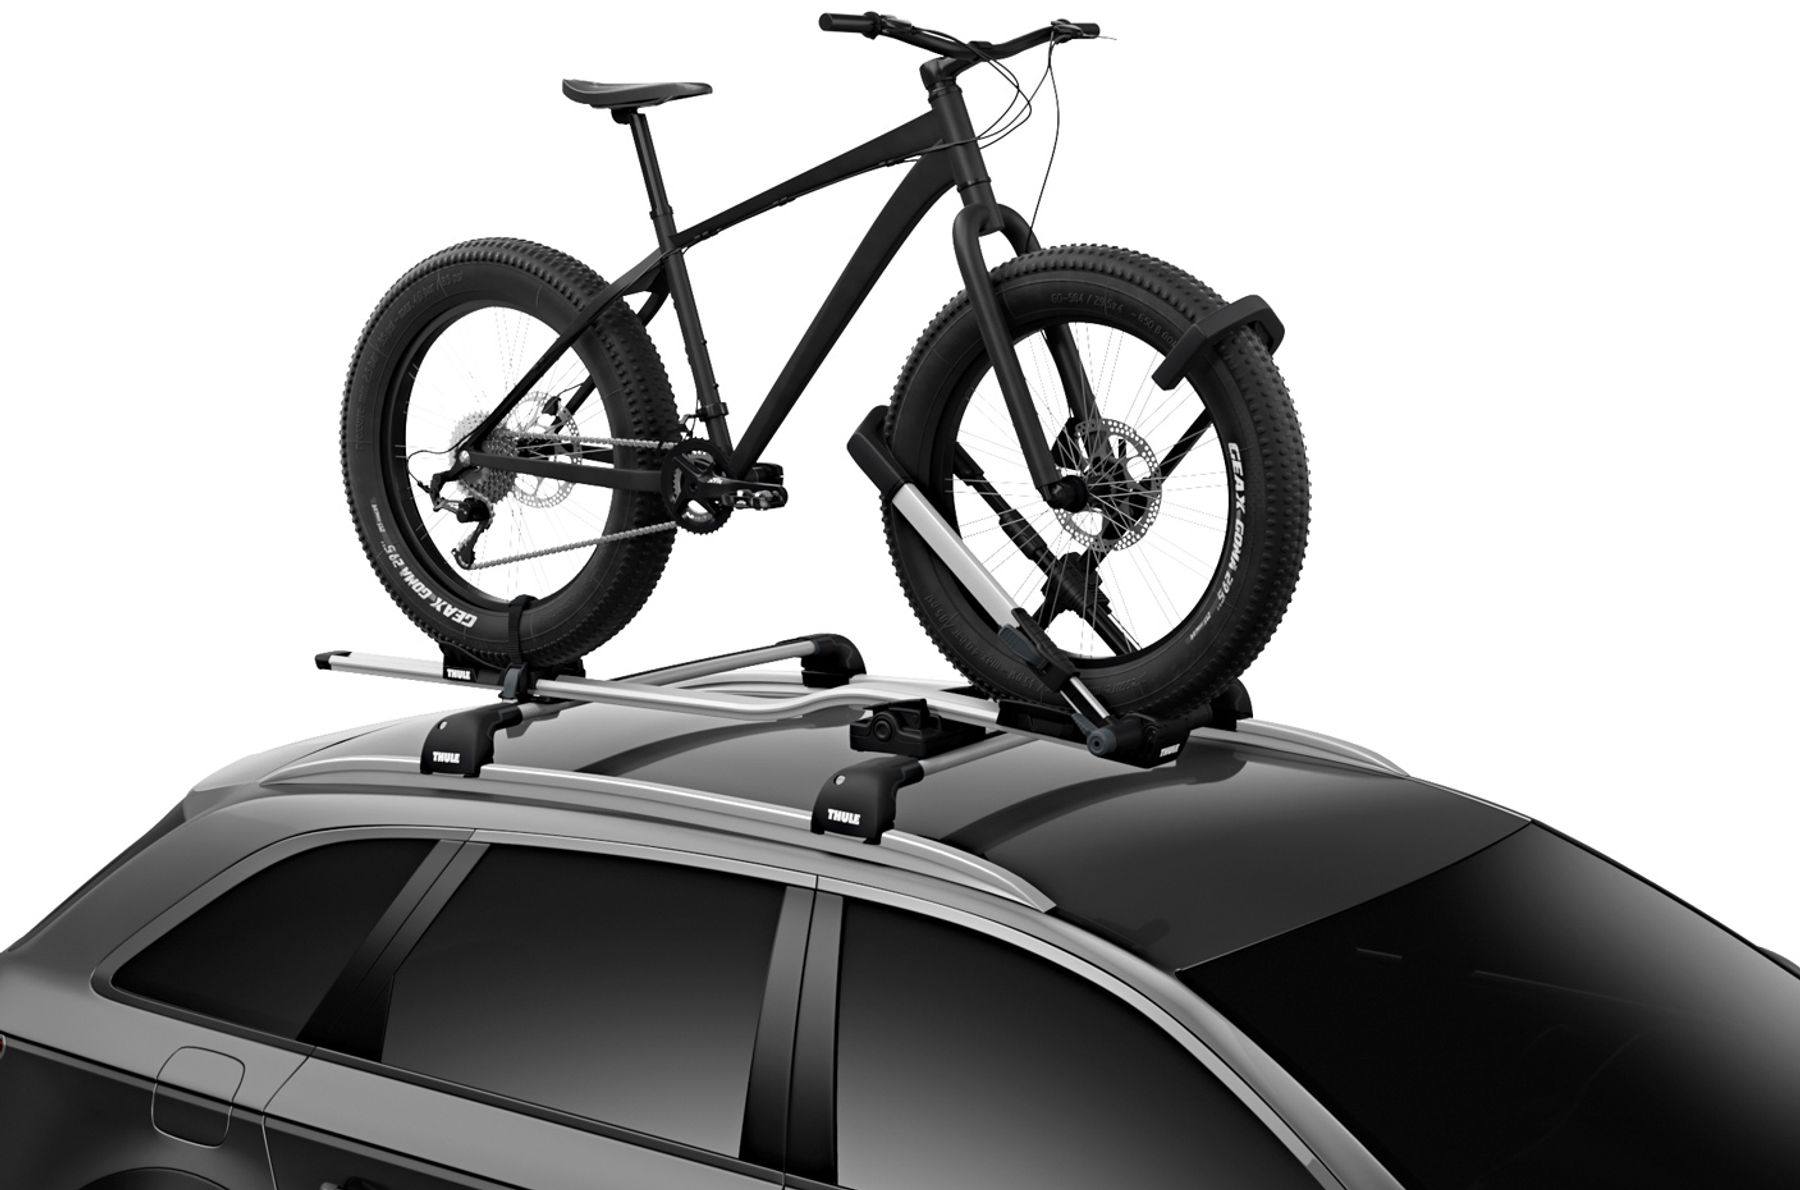 Thule UpRide 599 Fatbike adapter in use on car